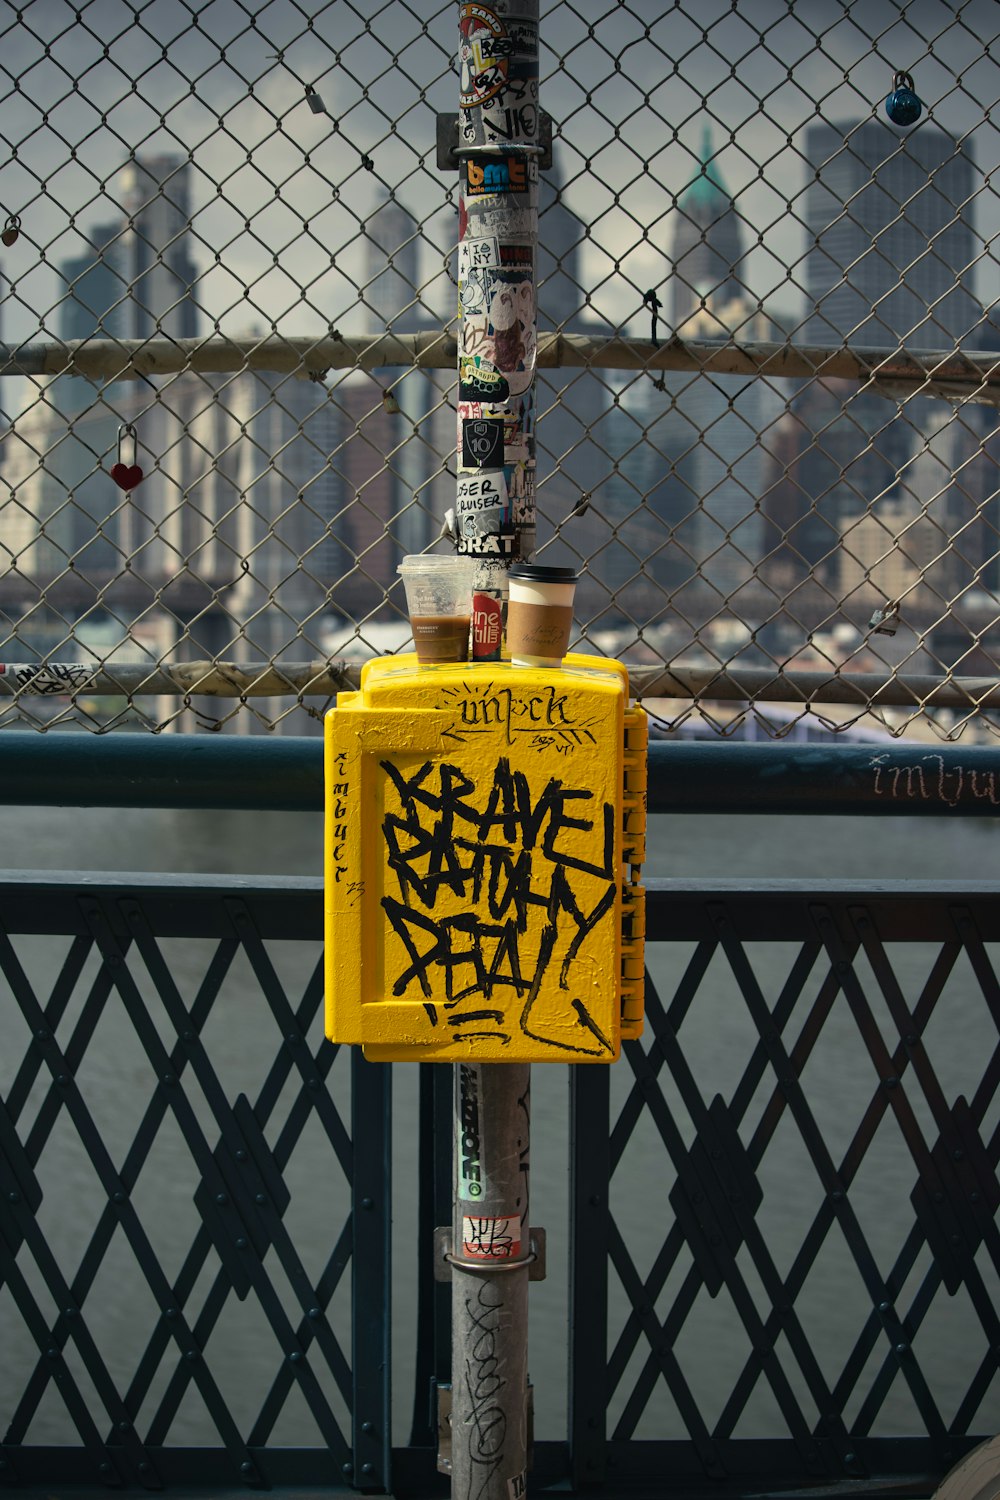 a yellow box with graffiti on it sitting next to a fence